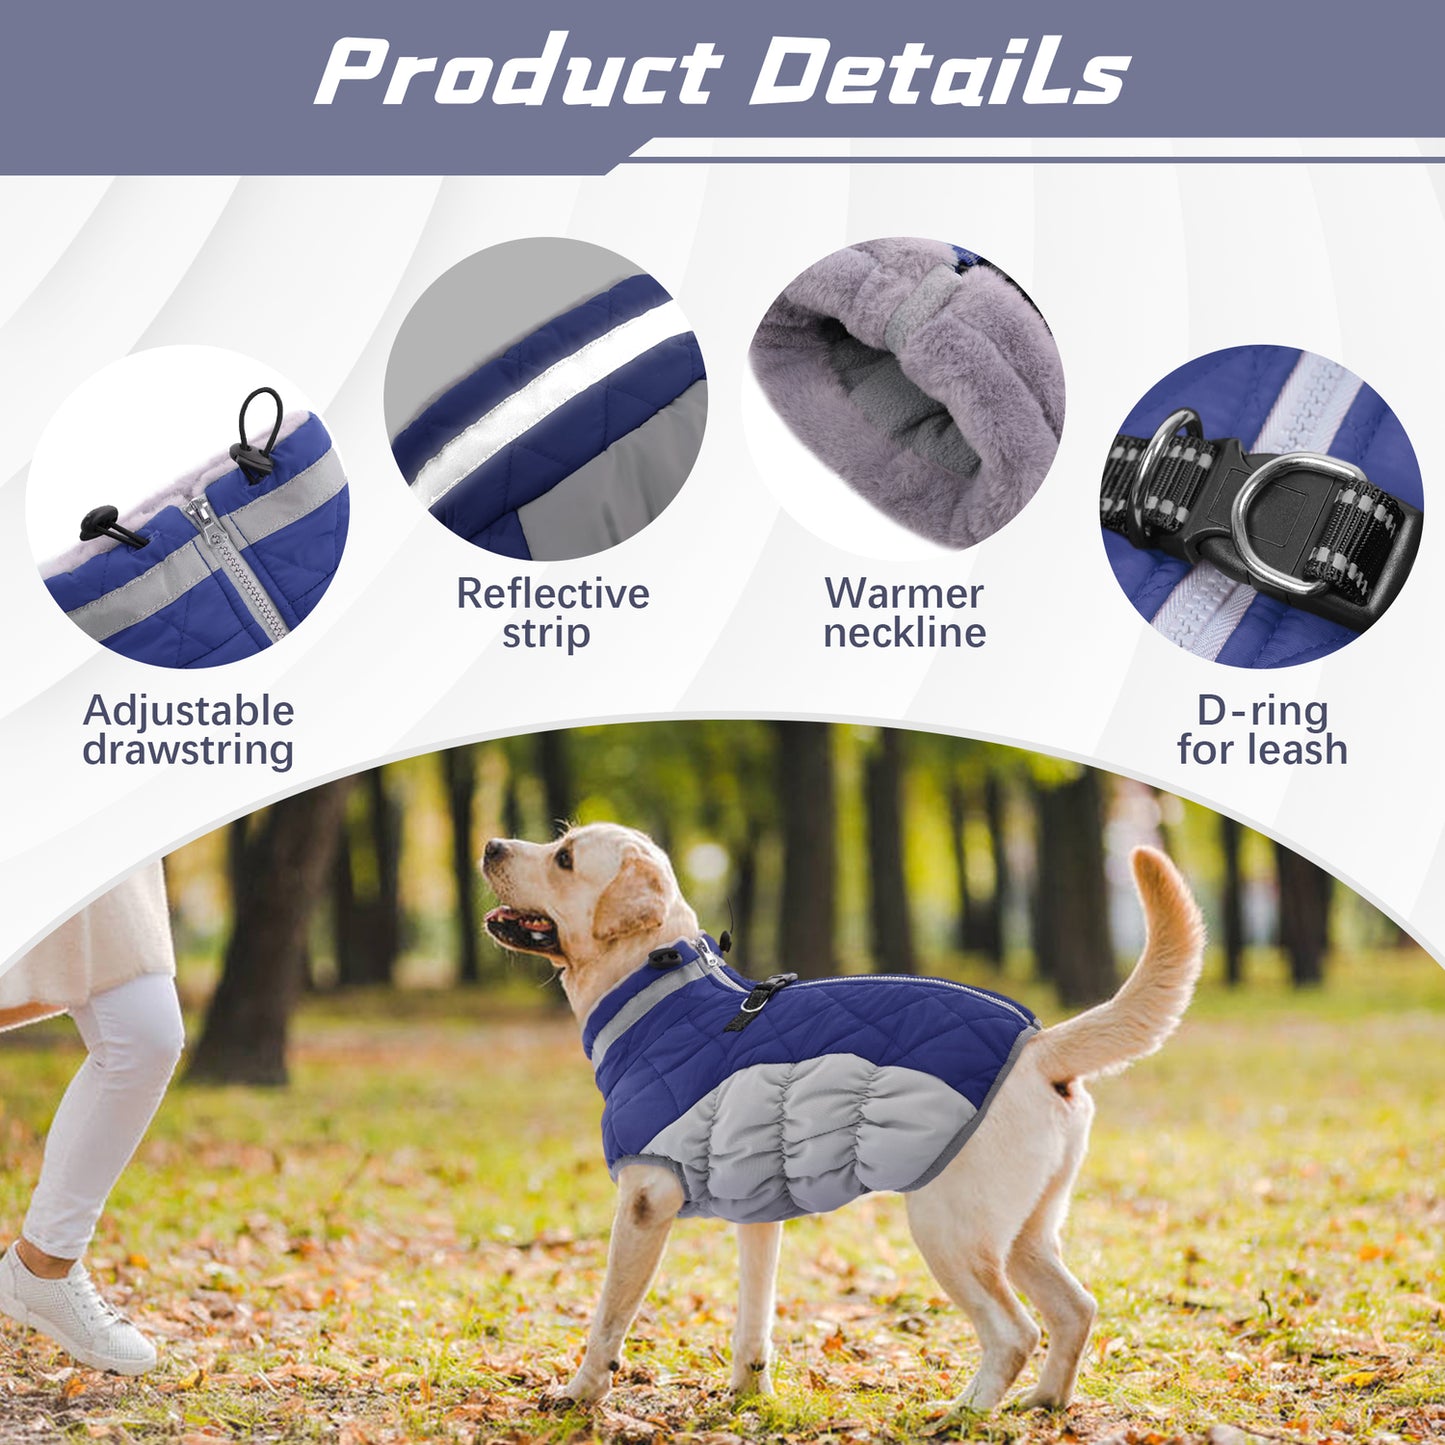 ROZKITCH Warm Dog Winter Coat Cold Weather Jacket Windproof Reflective Turtleneck with Neckline D-Ring for Leash Thick Fleece Lining Outdoor Padded Vest Small Medium Large Dogs